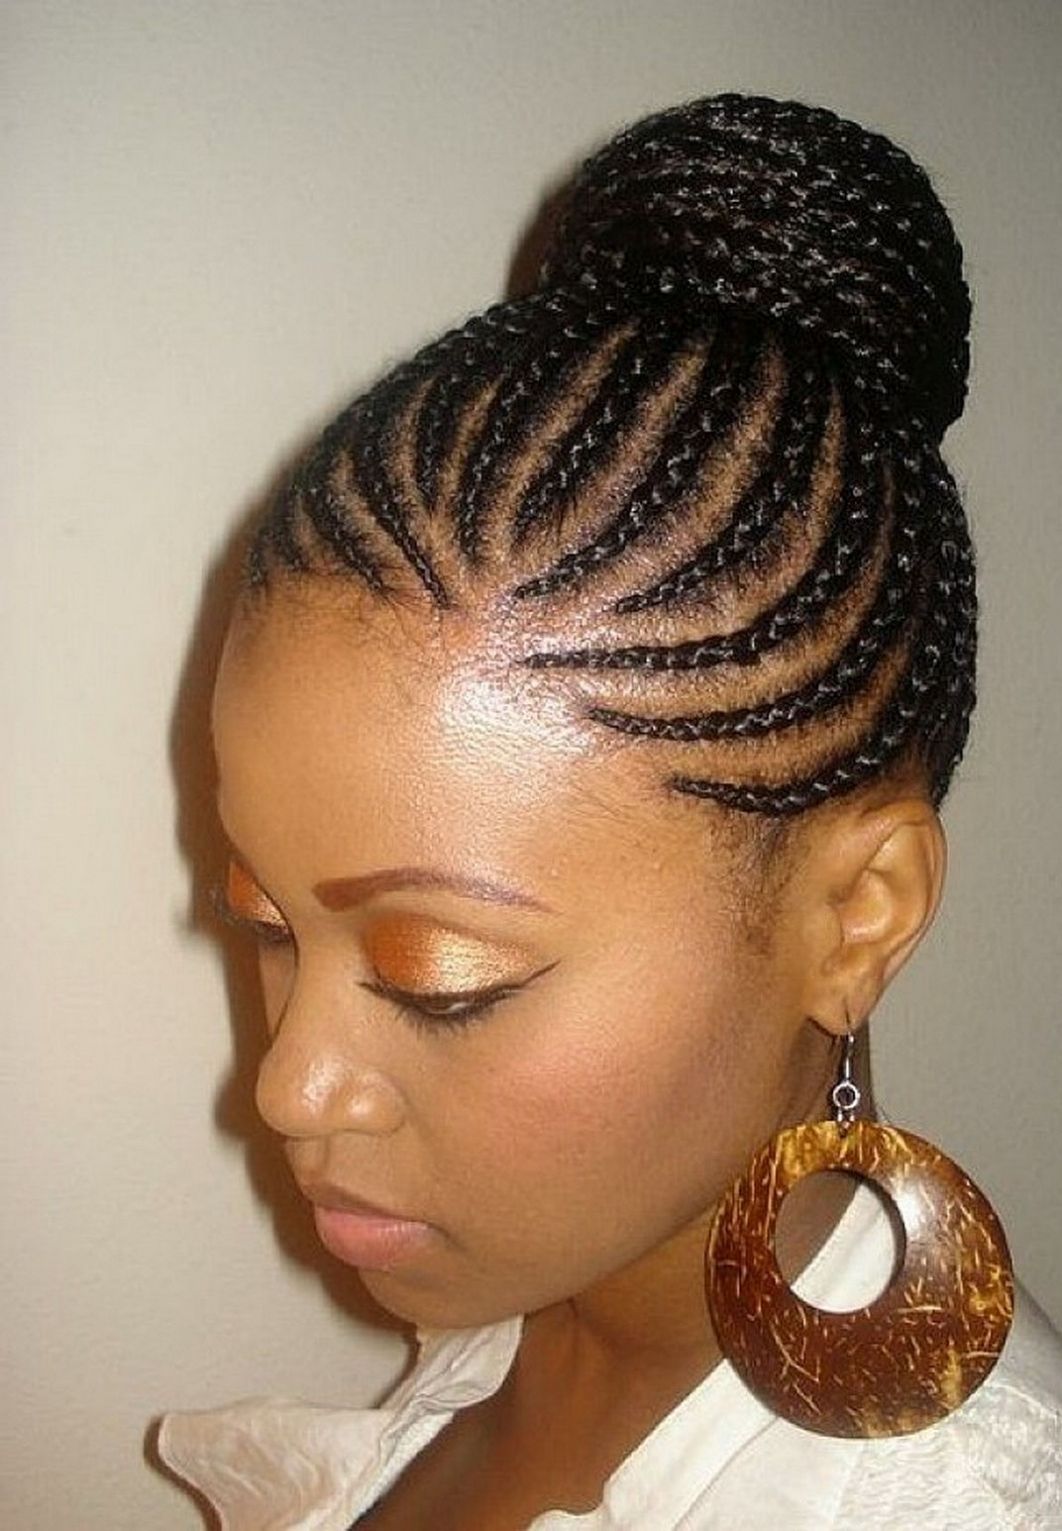 Hairstyles ~ Braided Updo Black Hairstyles Braided Updo Hairstyles Inside Braided Updo Black Hairstyles (View 13 of 15)